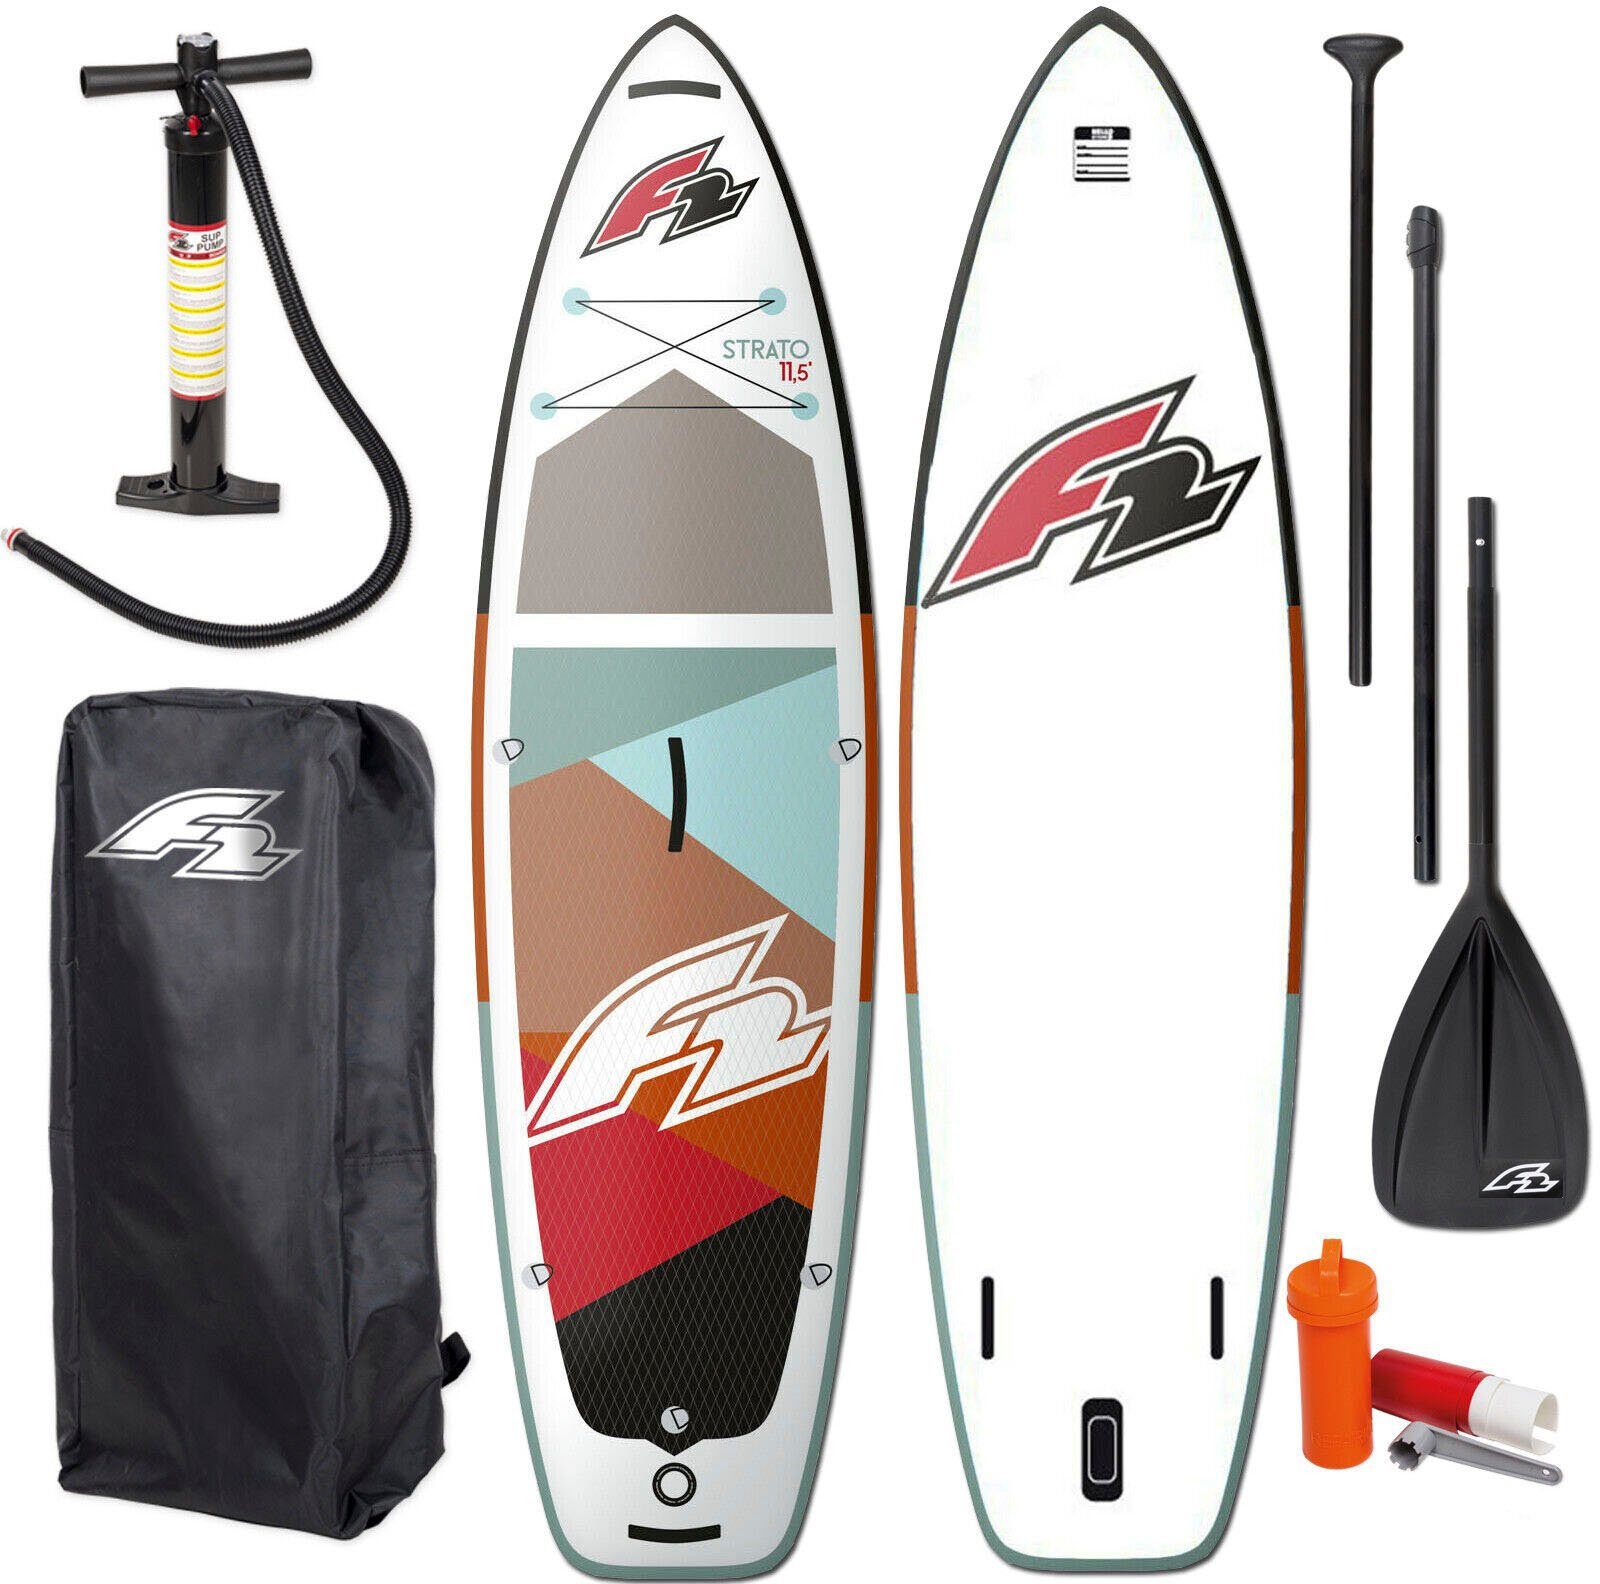 F2 Inflatable (Packung, 10,5 red, women 5 Strato tlg) SUP-Board